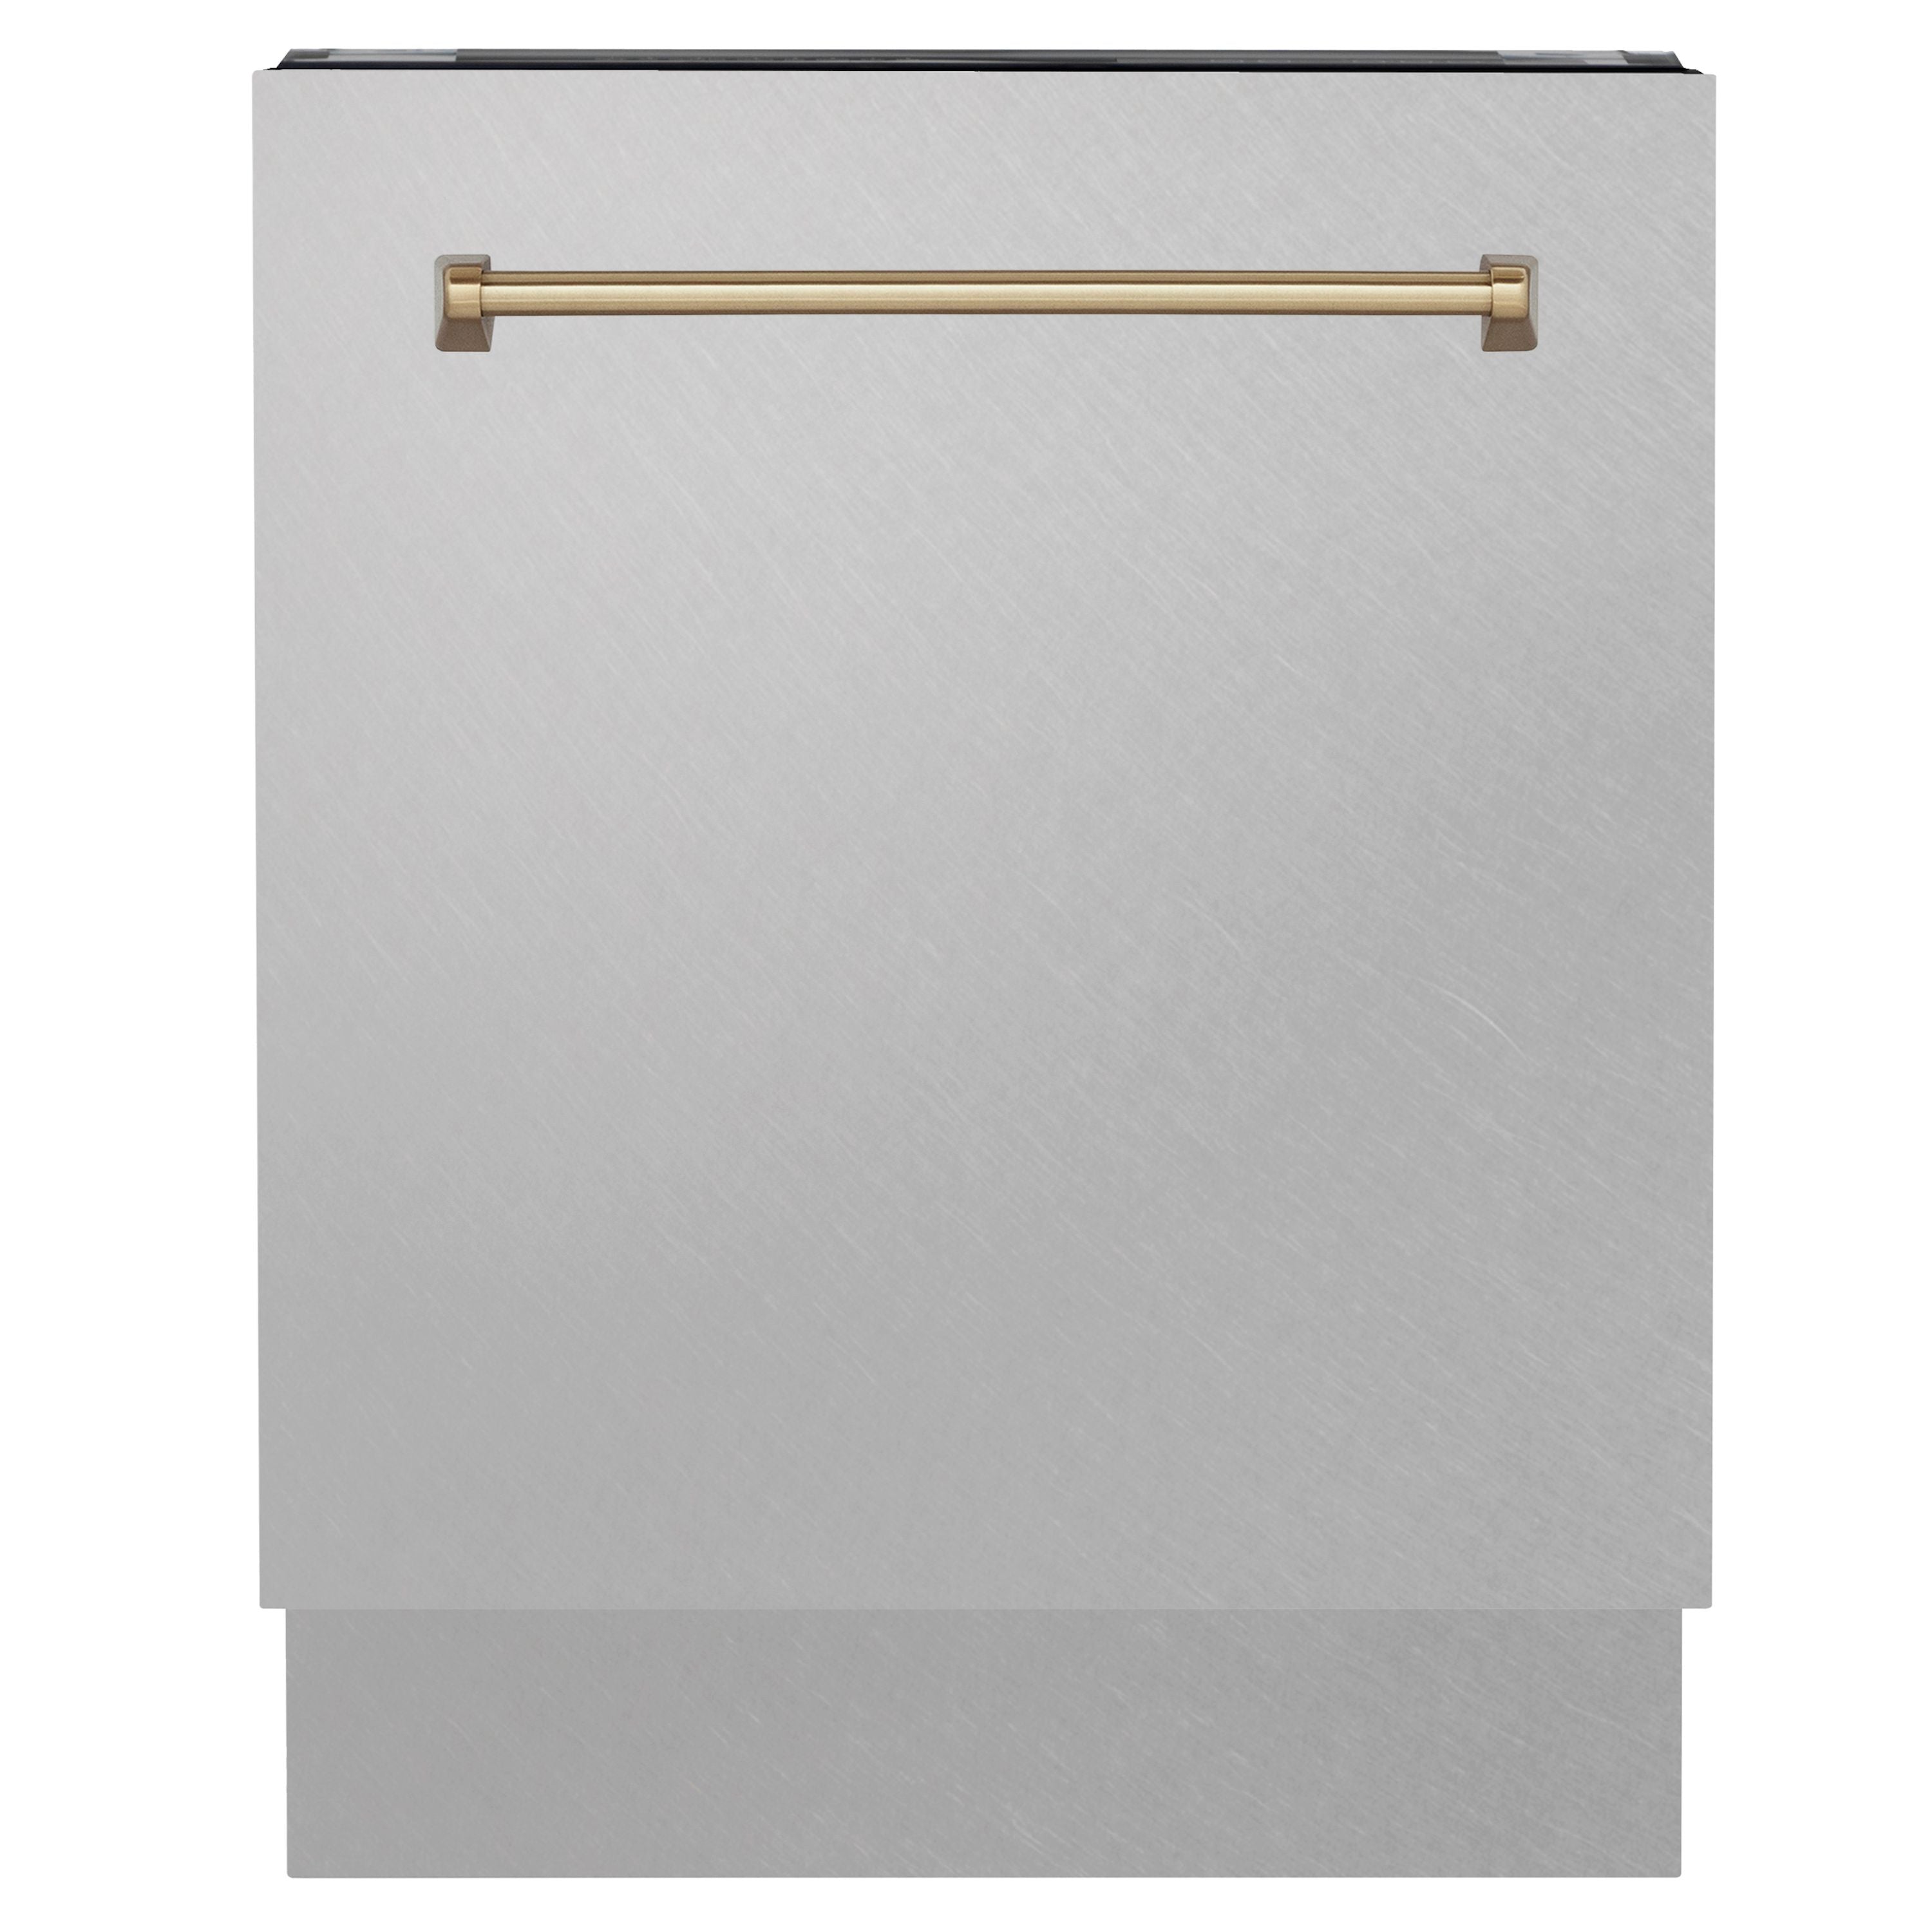 ZLINE Autograph Series 24 inch Tall Dishwasher in DuraSnow® Stainless Steel with Champagne Bronze Handle